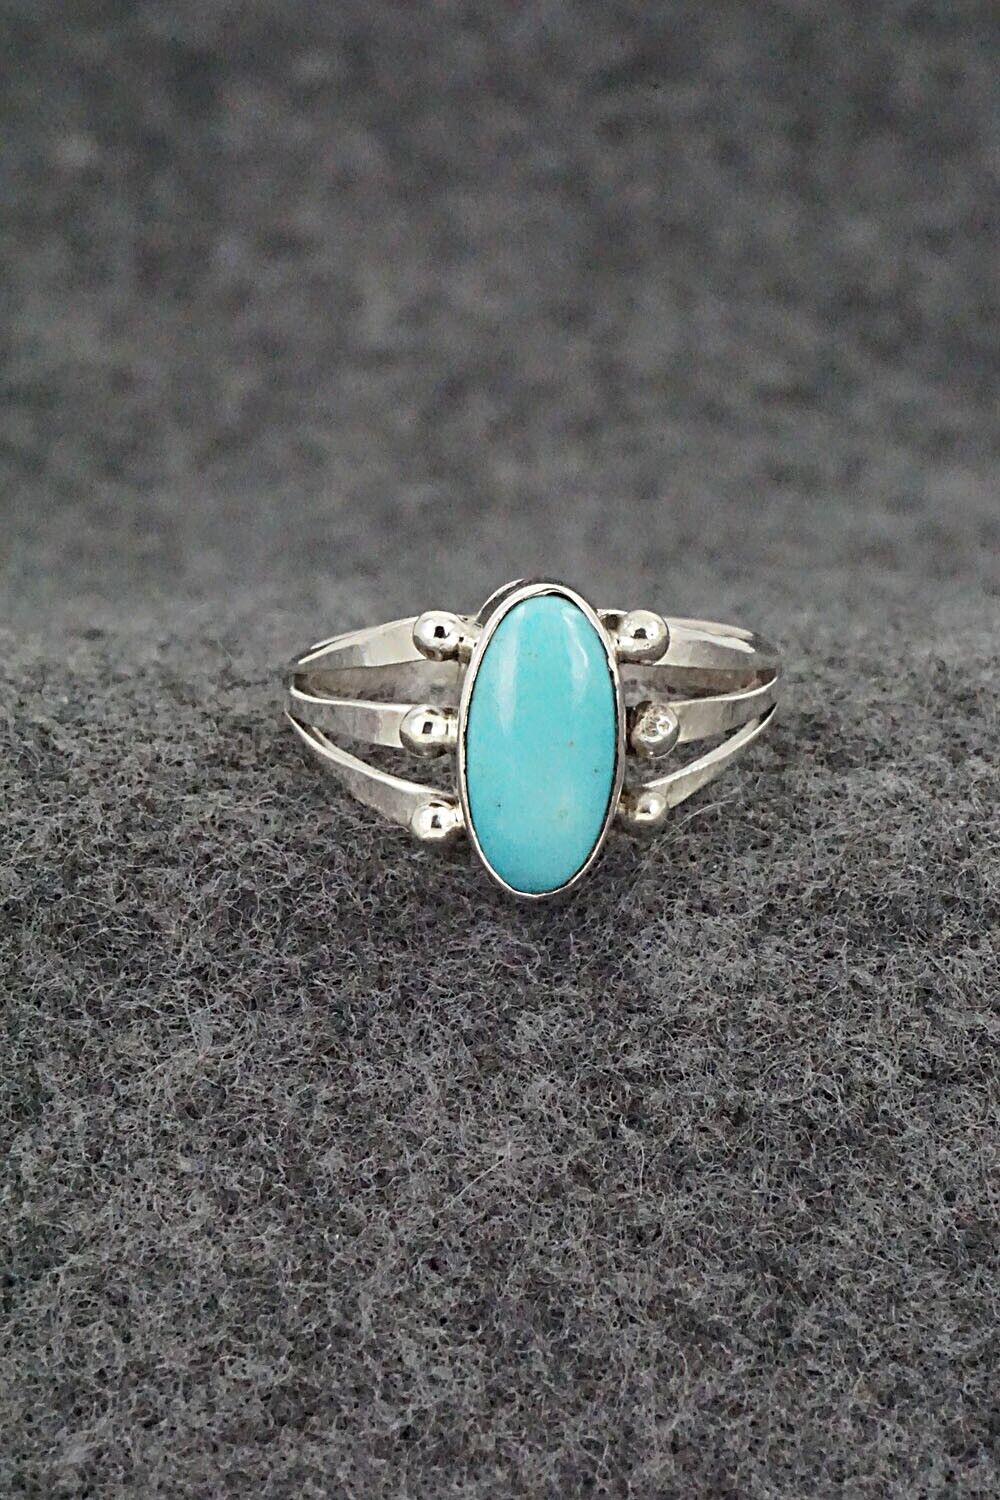 Turquoise & Sterling Silver Ring - Paige Gordon - Size 8